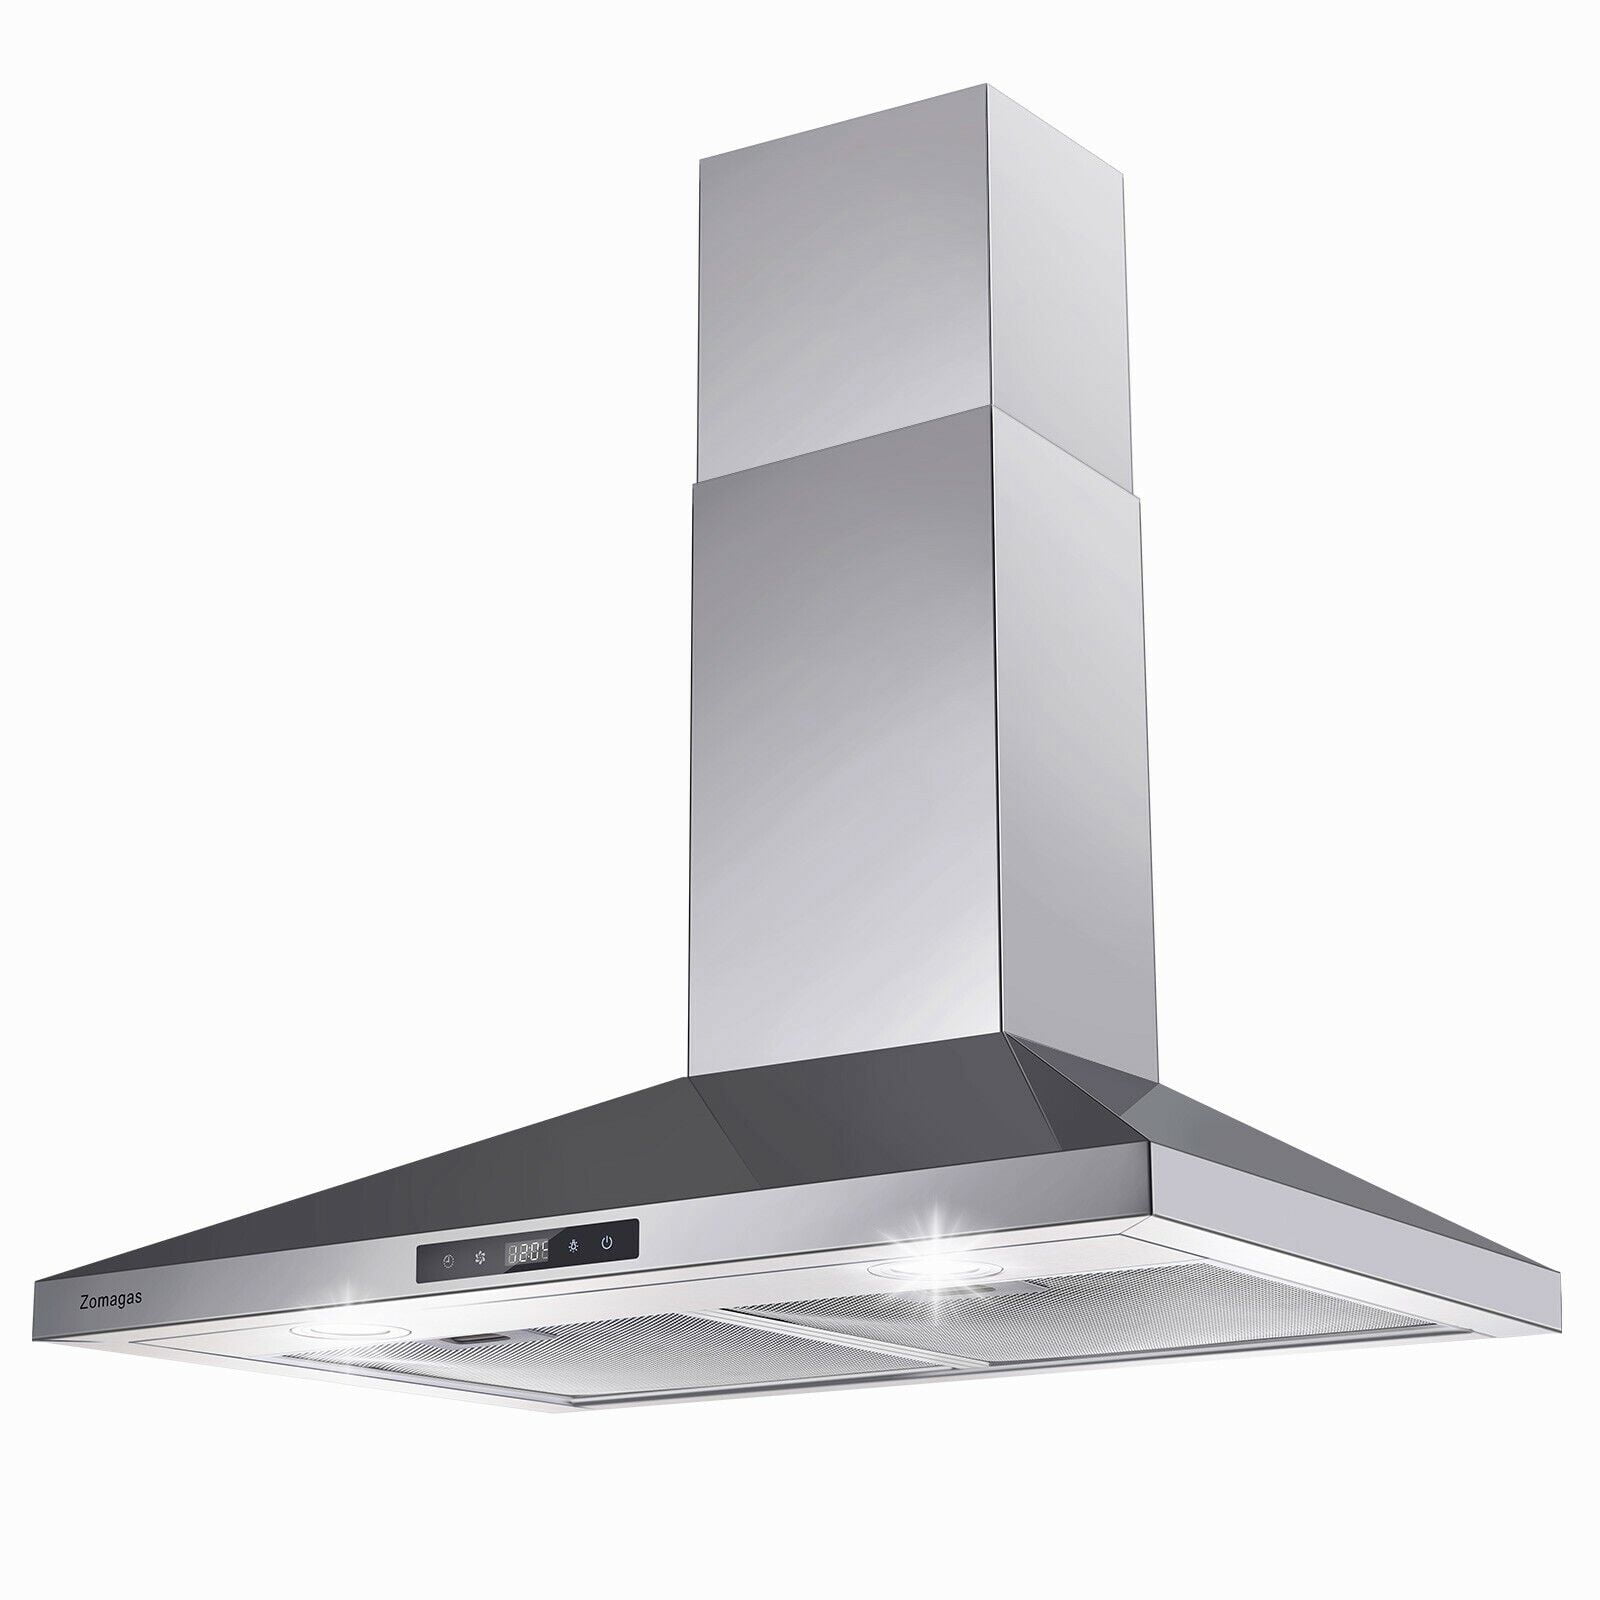 IKTCH 30 inch Black Wall Mount Range Hood, 900 CFM Ducted/Ductless Stainless Steel Vent Hood with Gesture Sensing & Touch Control Switch Panel, 2